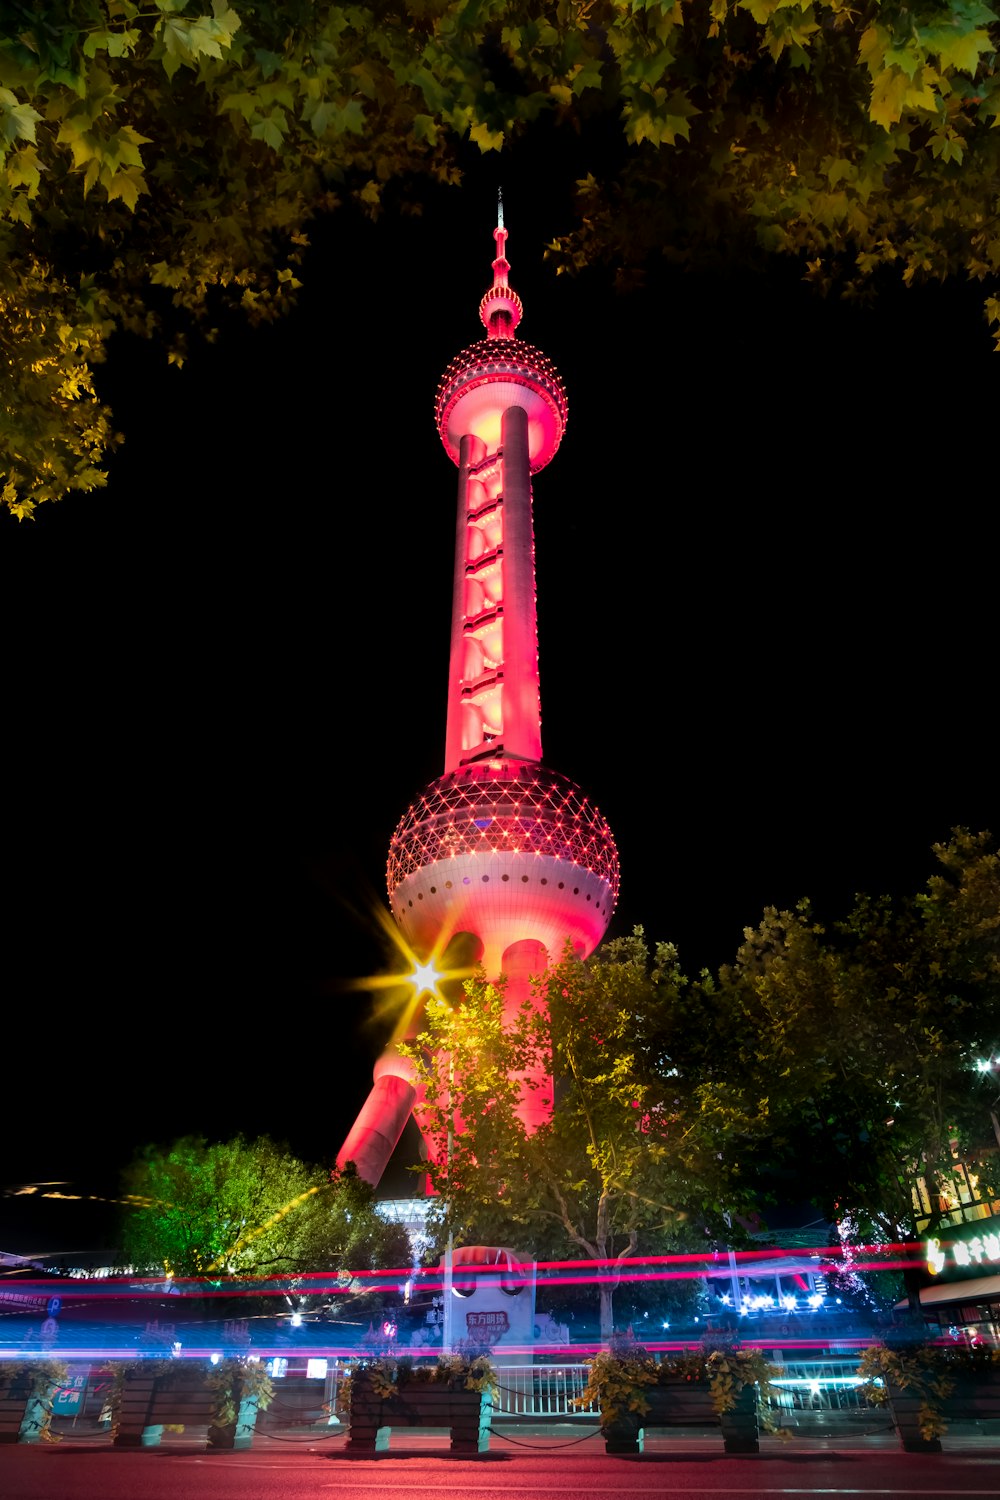 a tall tower with lights